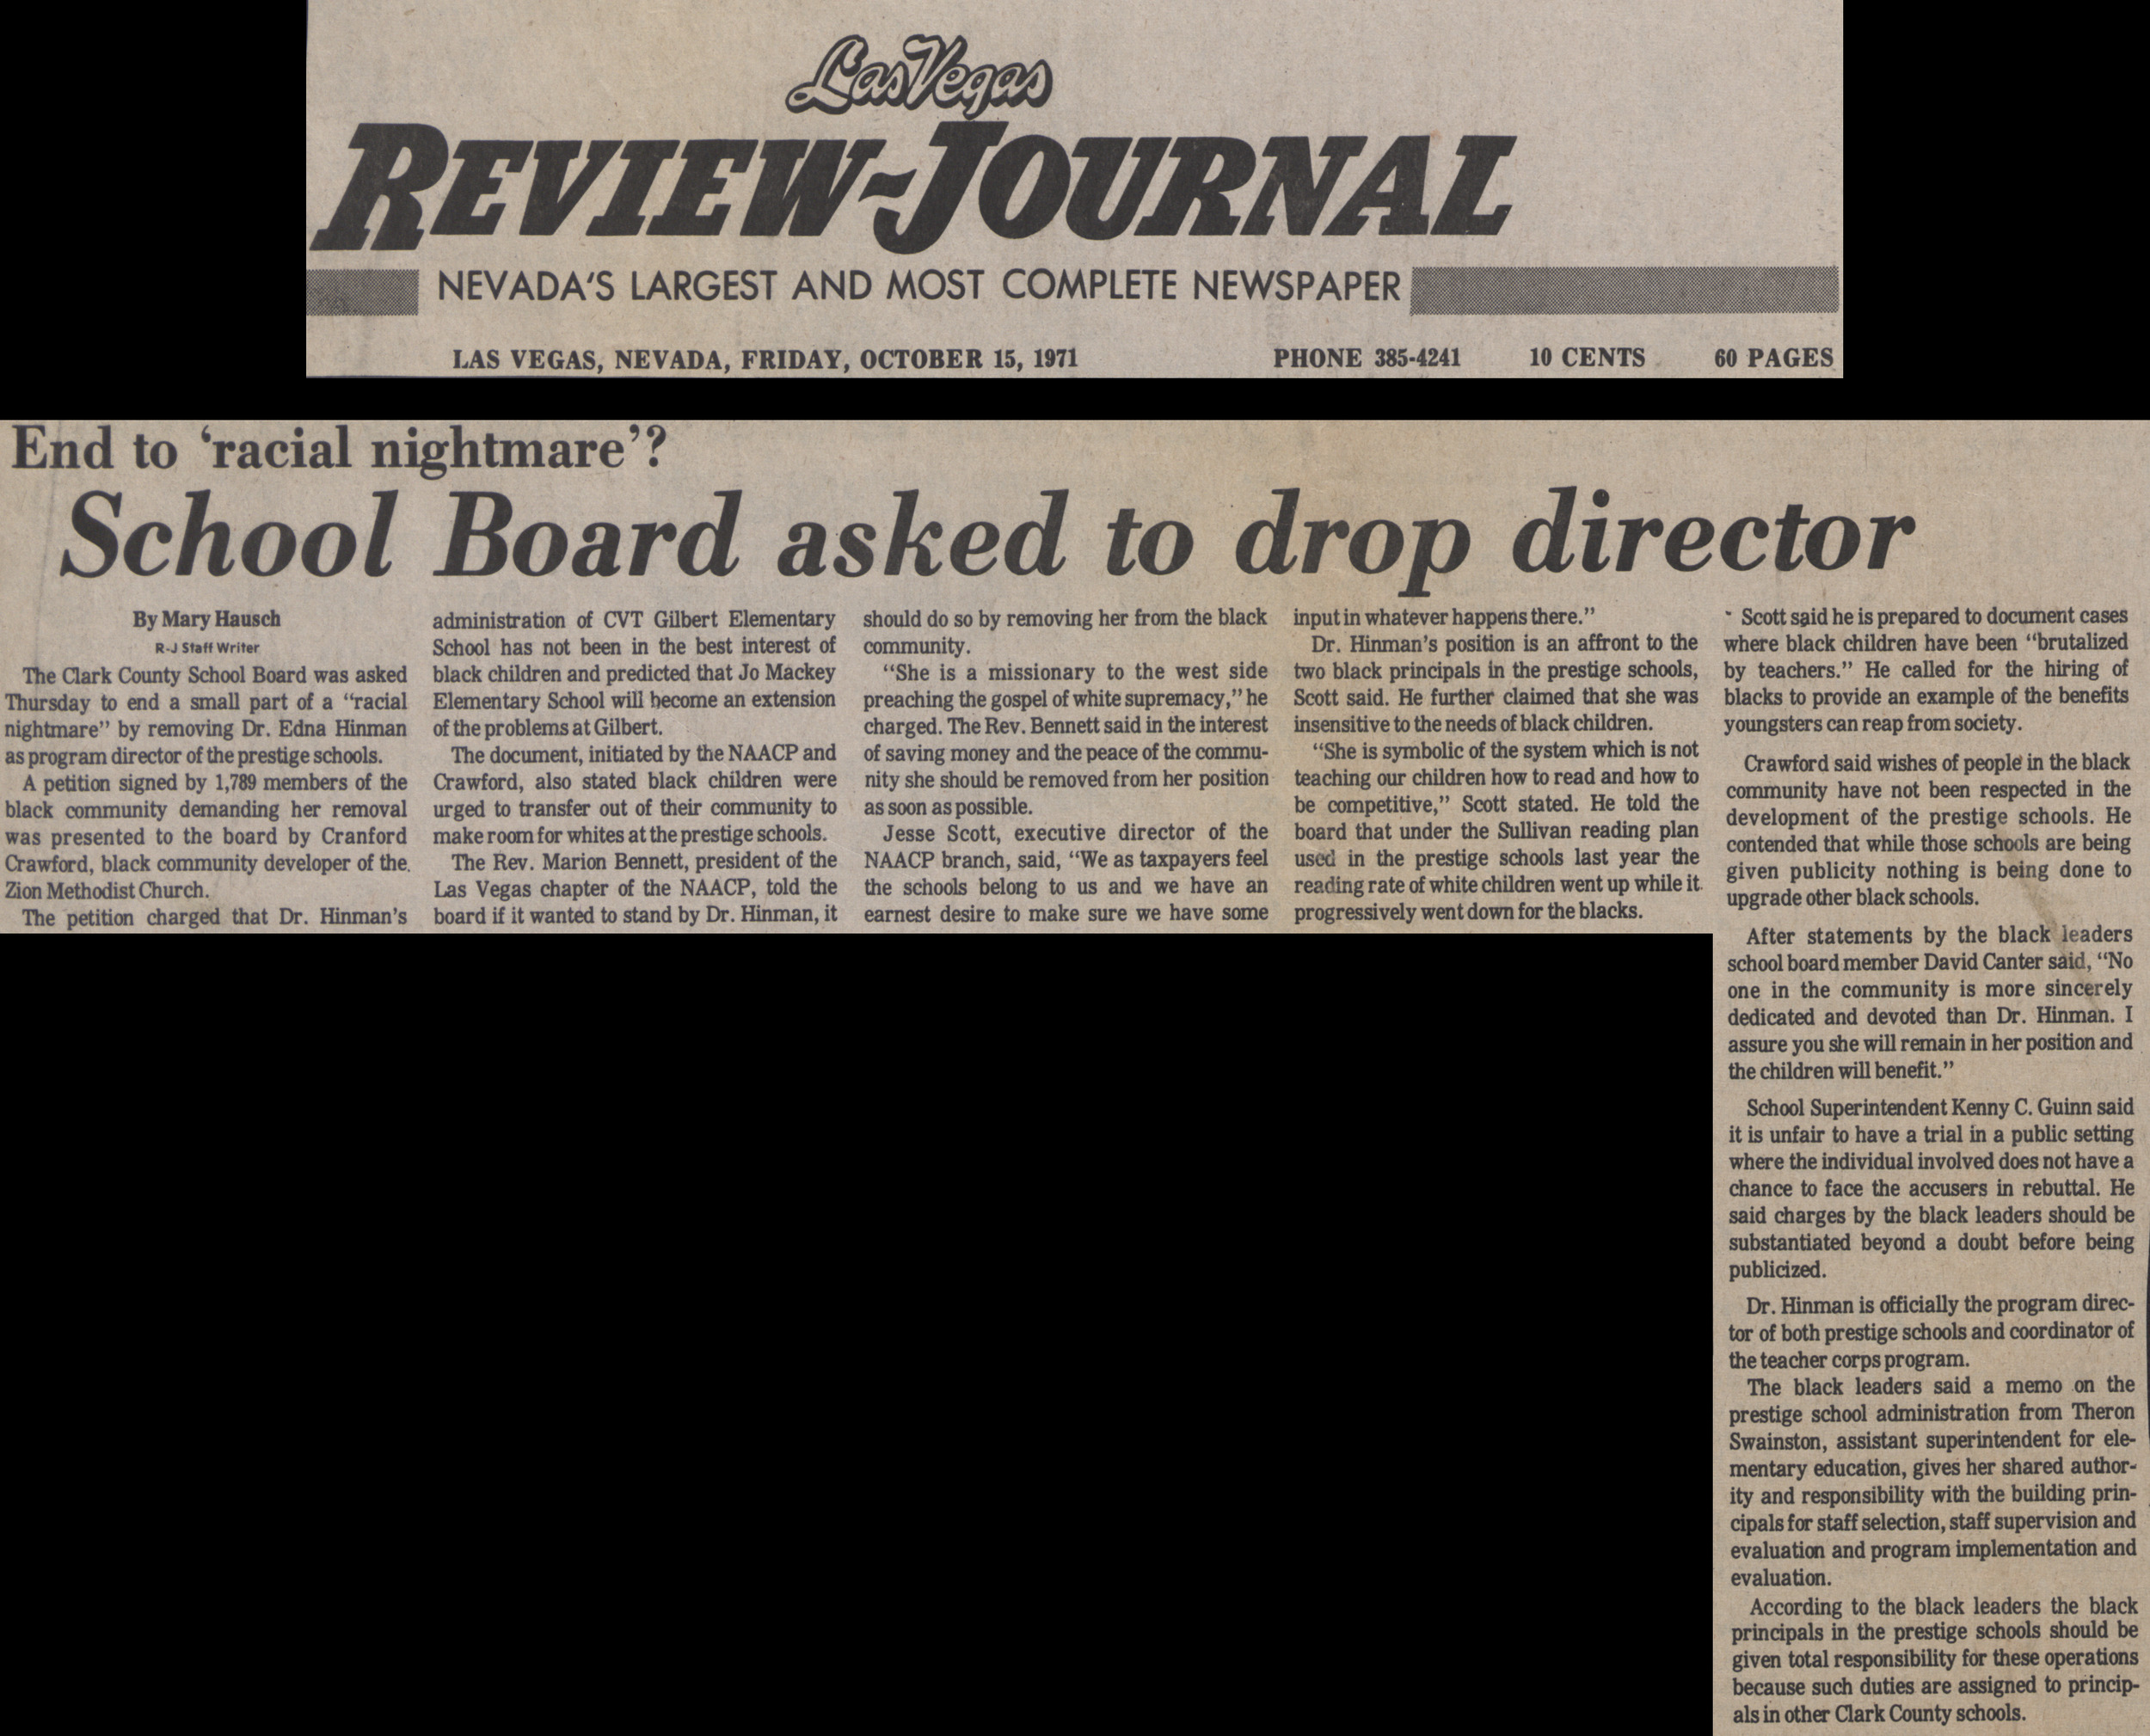 Newspaper clipping, End to 'racial nightmare'? School Board asked to drop director, Las Vegas Review Journal, October 15, 1971